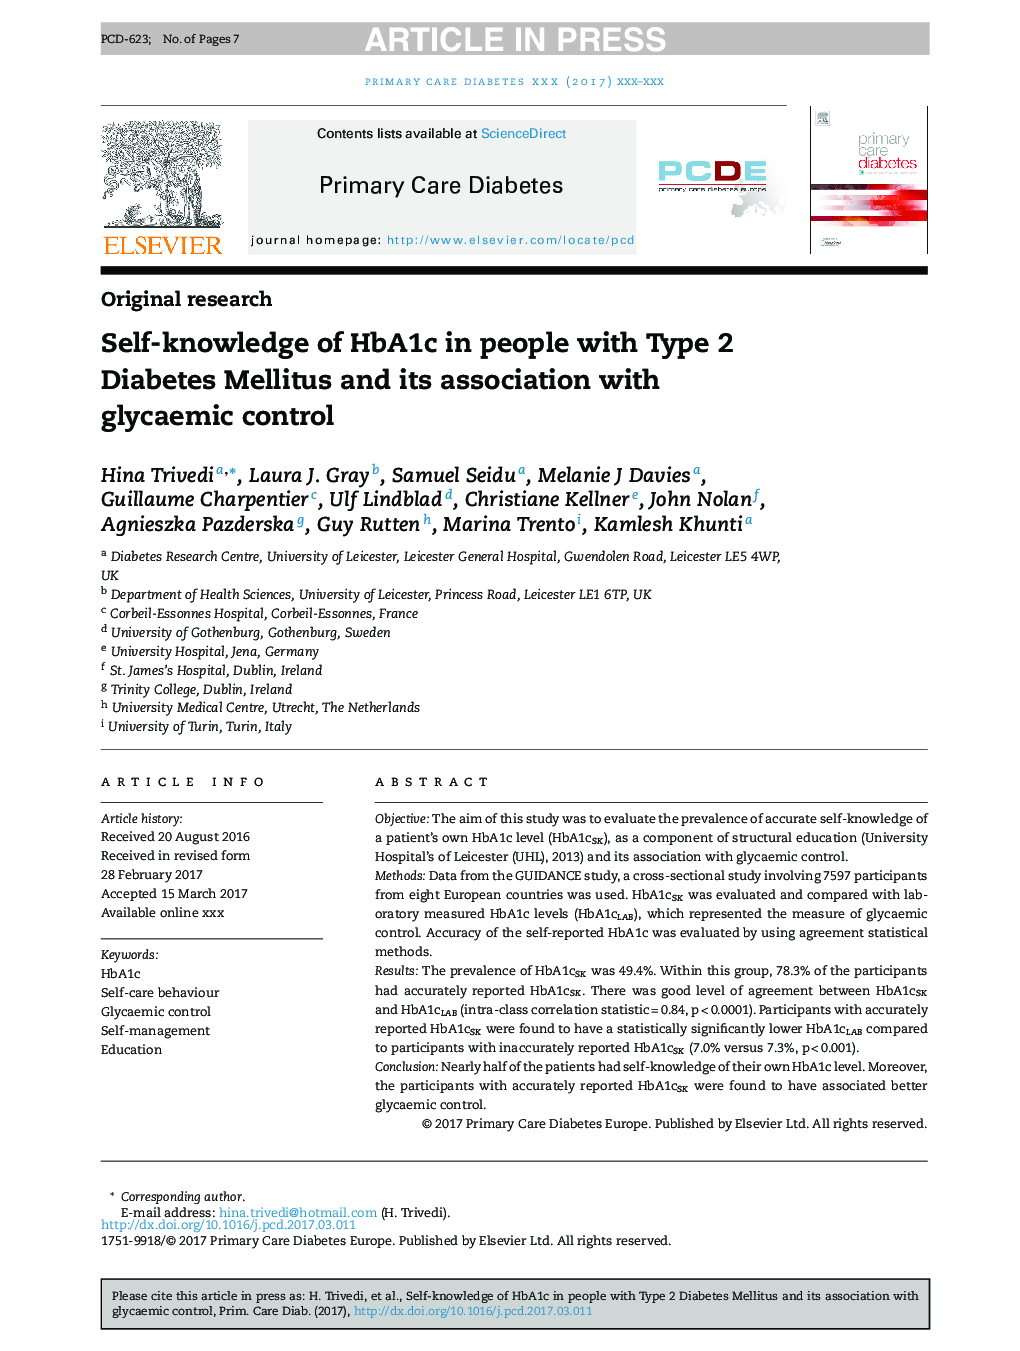 Self-knowledge of HbA1c in people with Type 2 Diabetes Mellitus and its association with glycaemic control